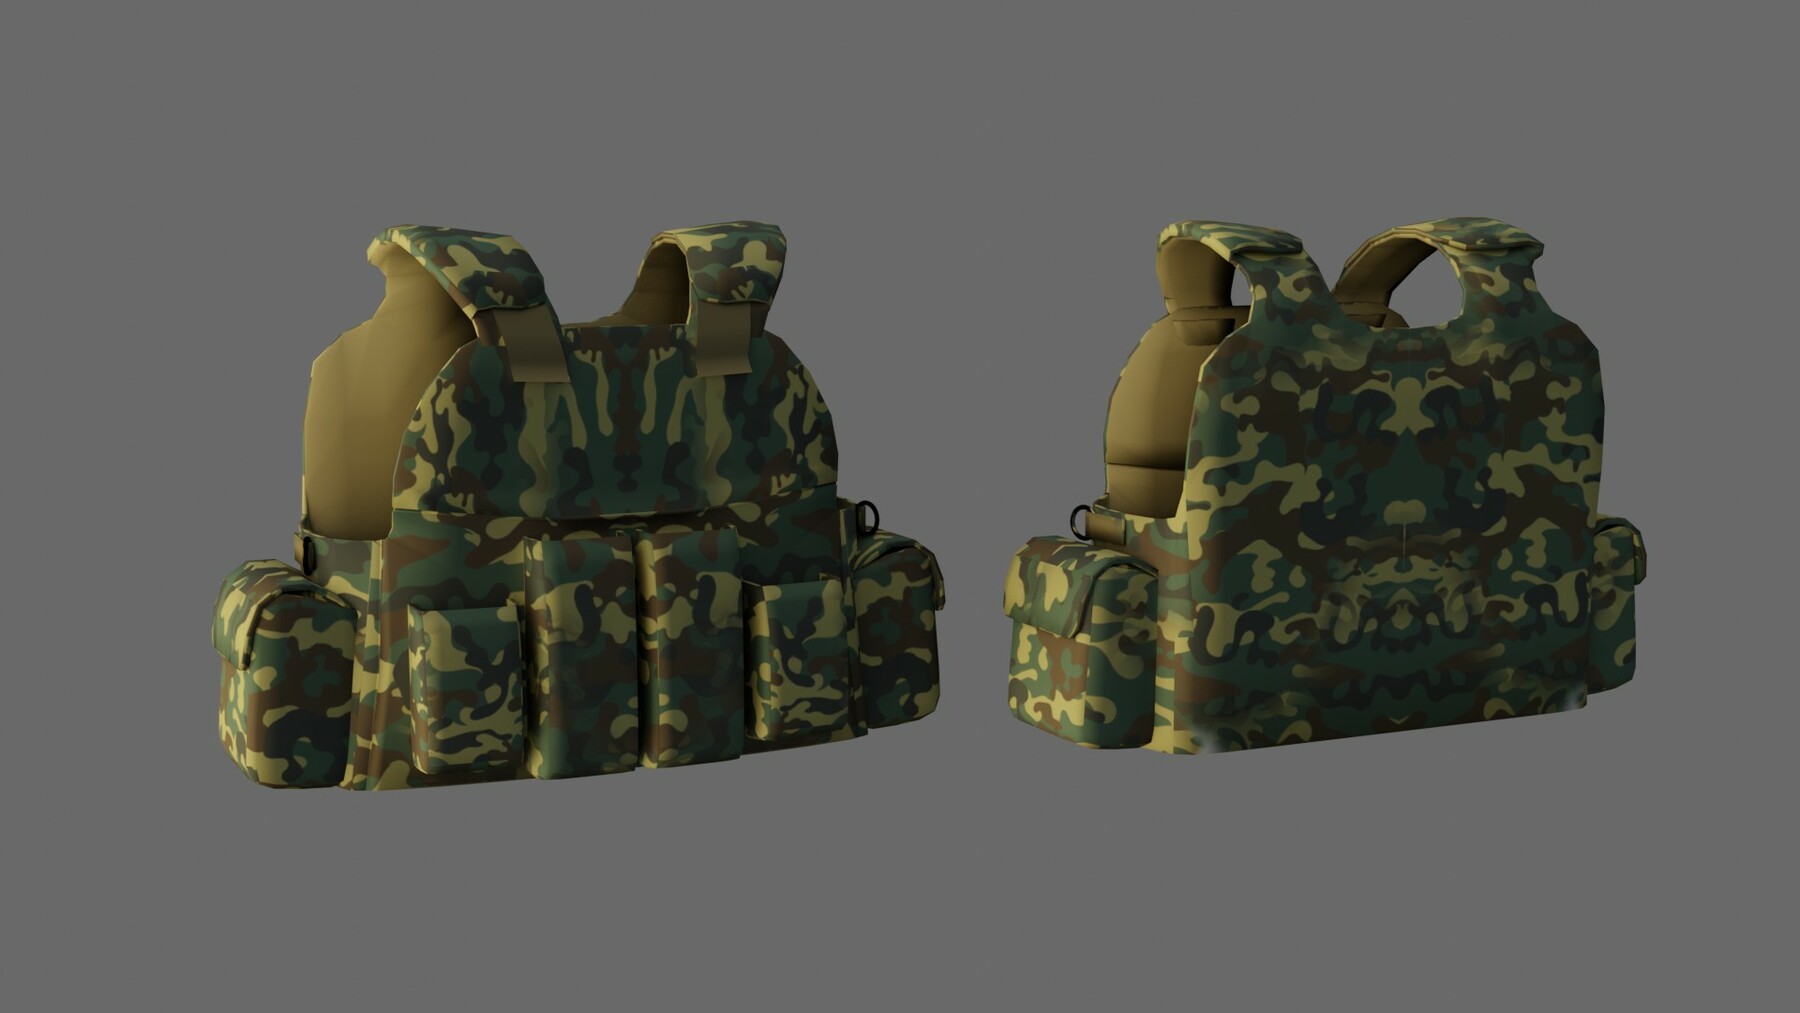 ArtStation - Tactical Bullet Proof Vest - PBR Lowpoly Game Ready